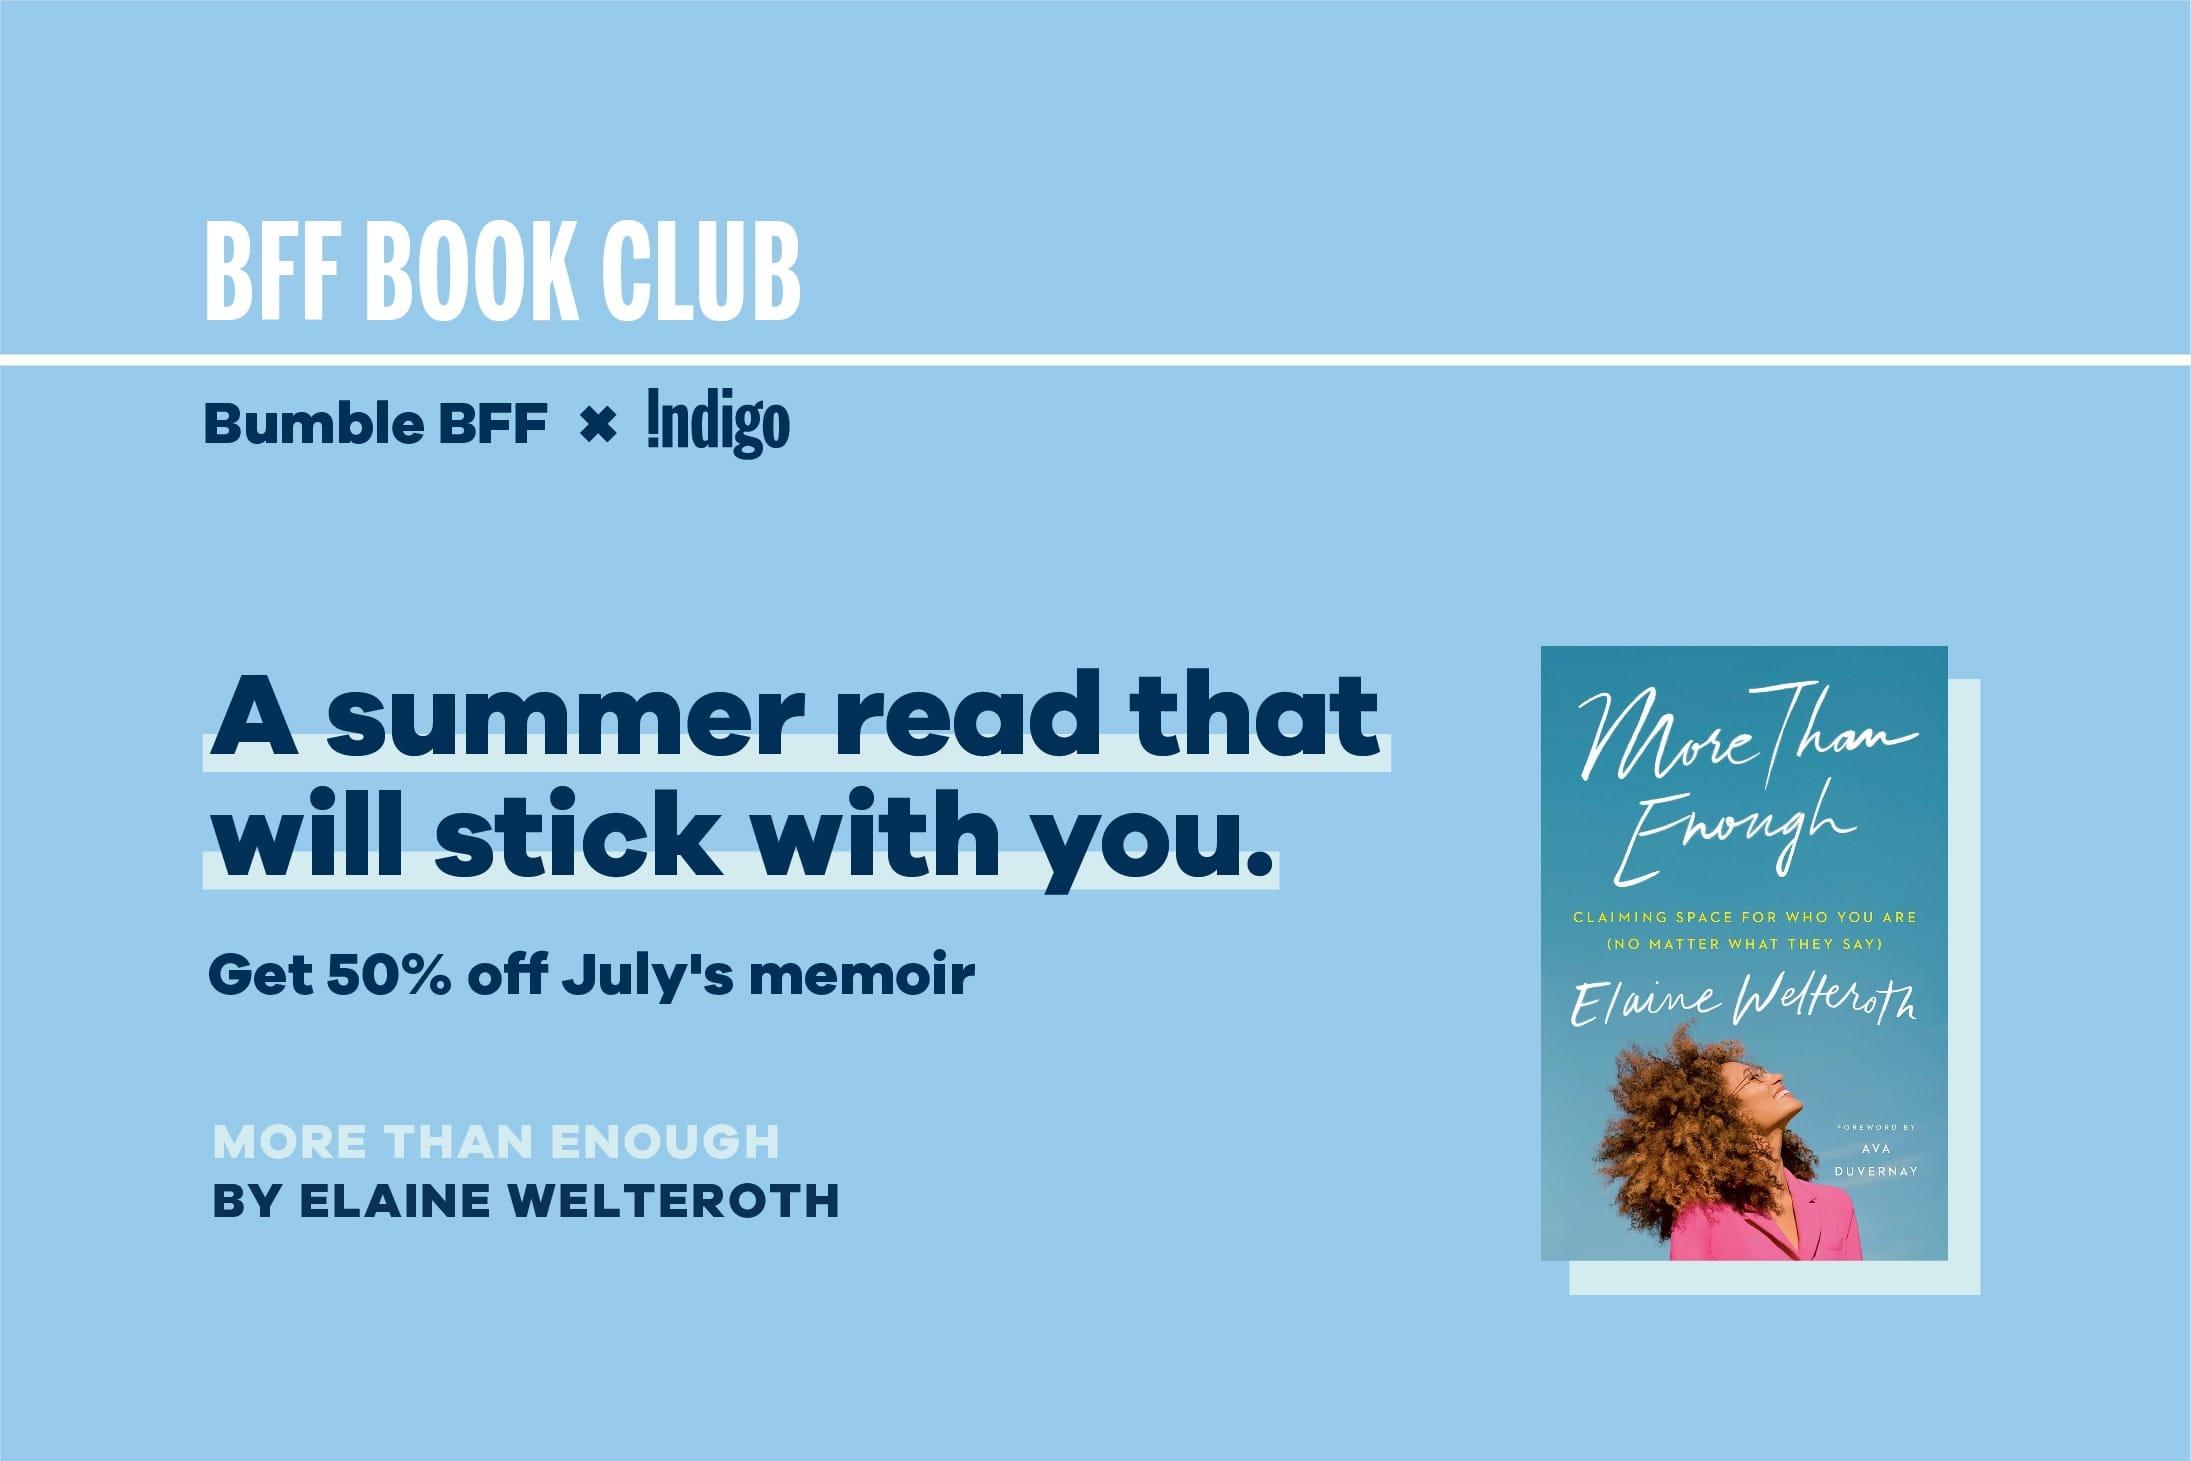 BFF Book Club, July Edition: We’re All “More Than Enough”